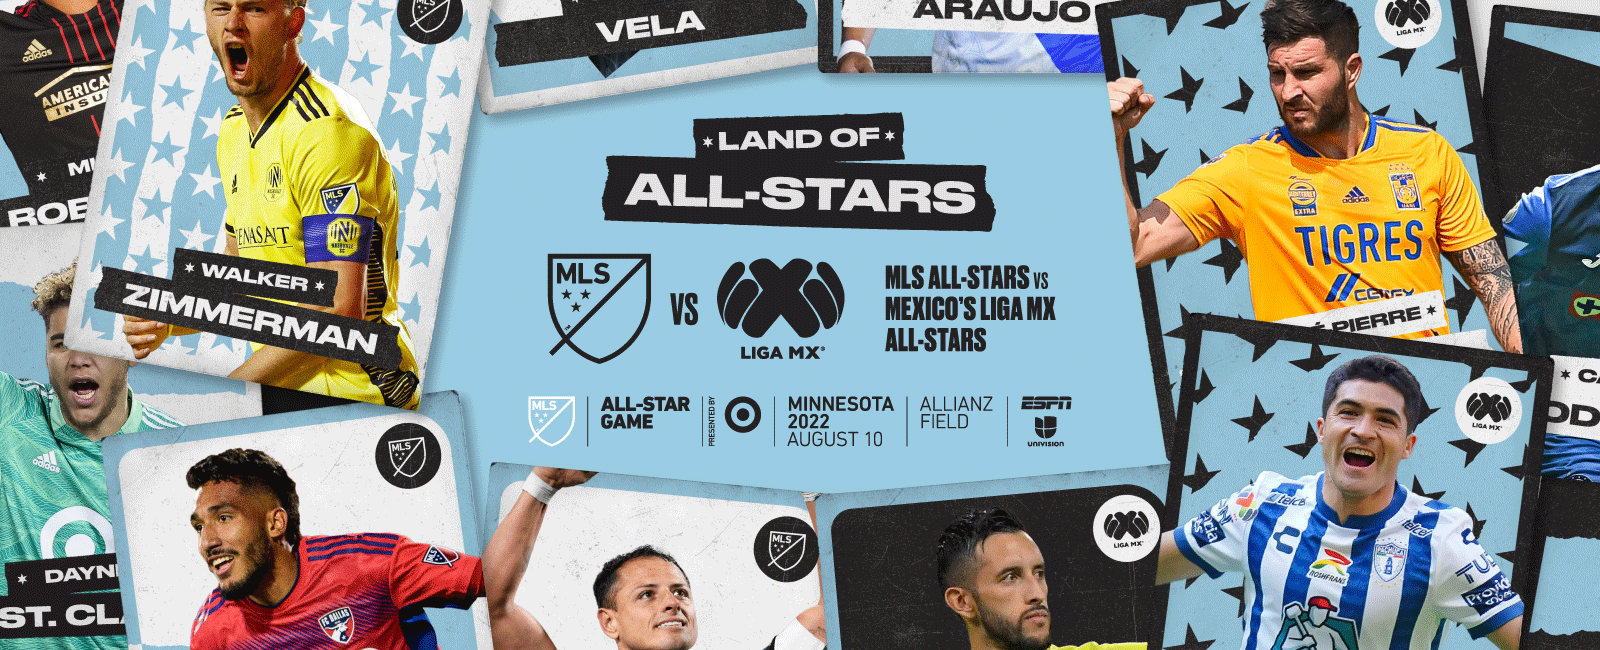 Minnesota selected to host 2022 MLS All-Star Game - SoccerWire